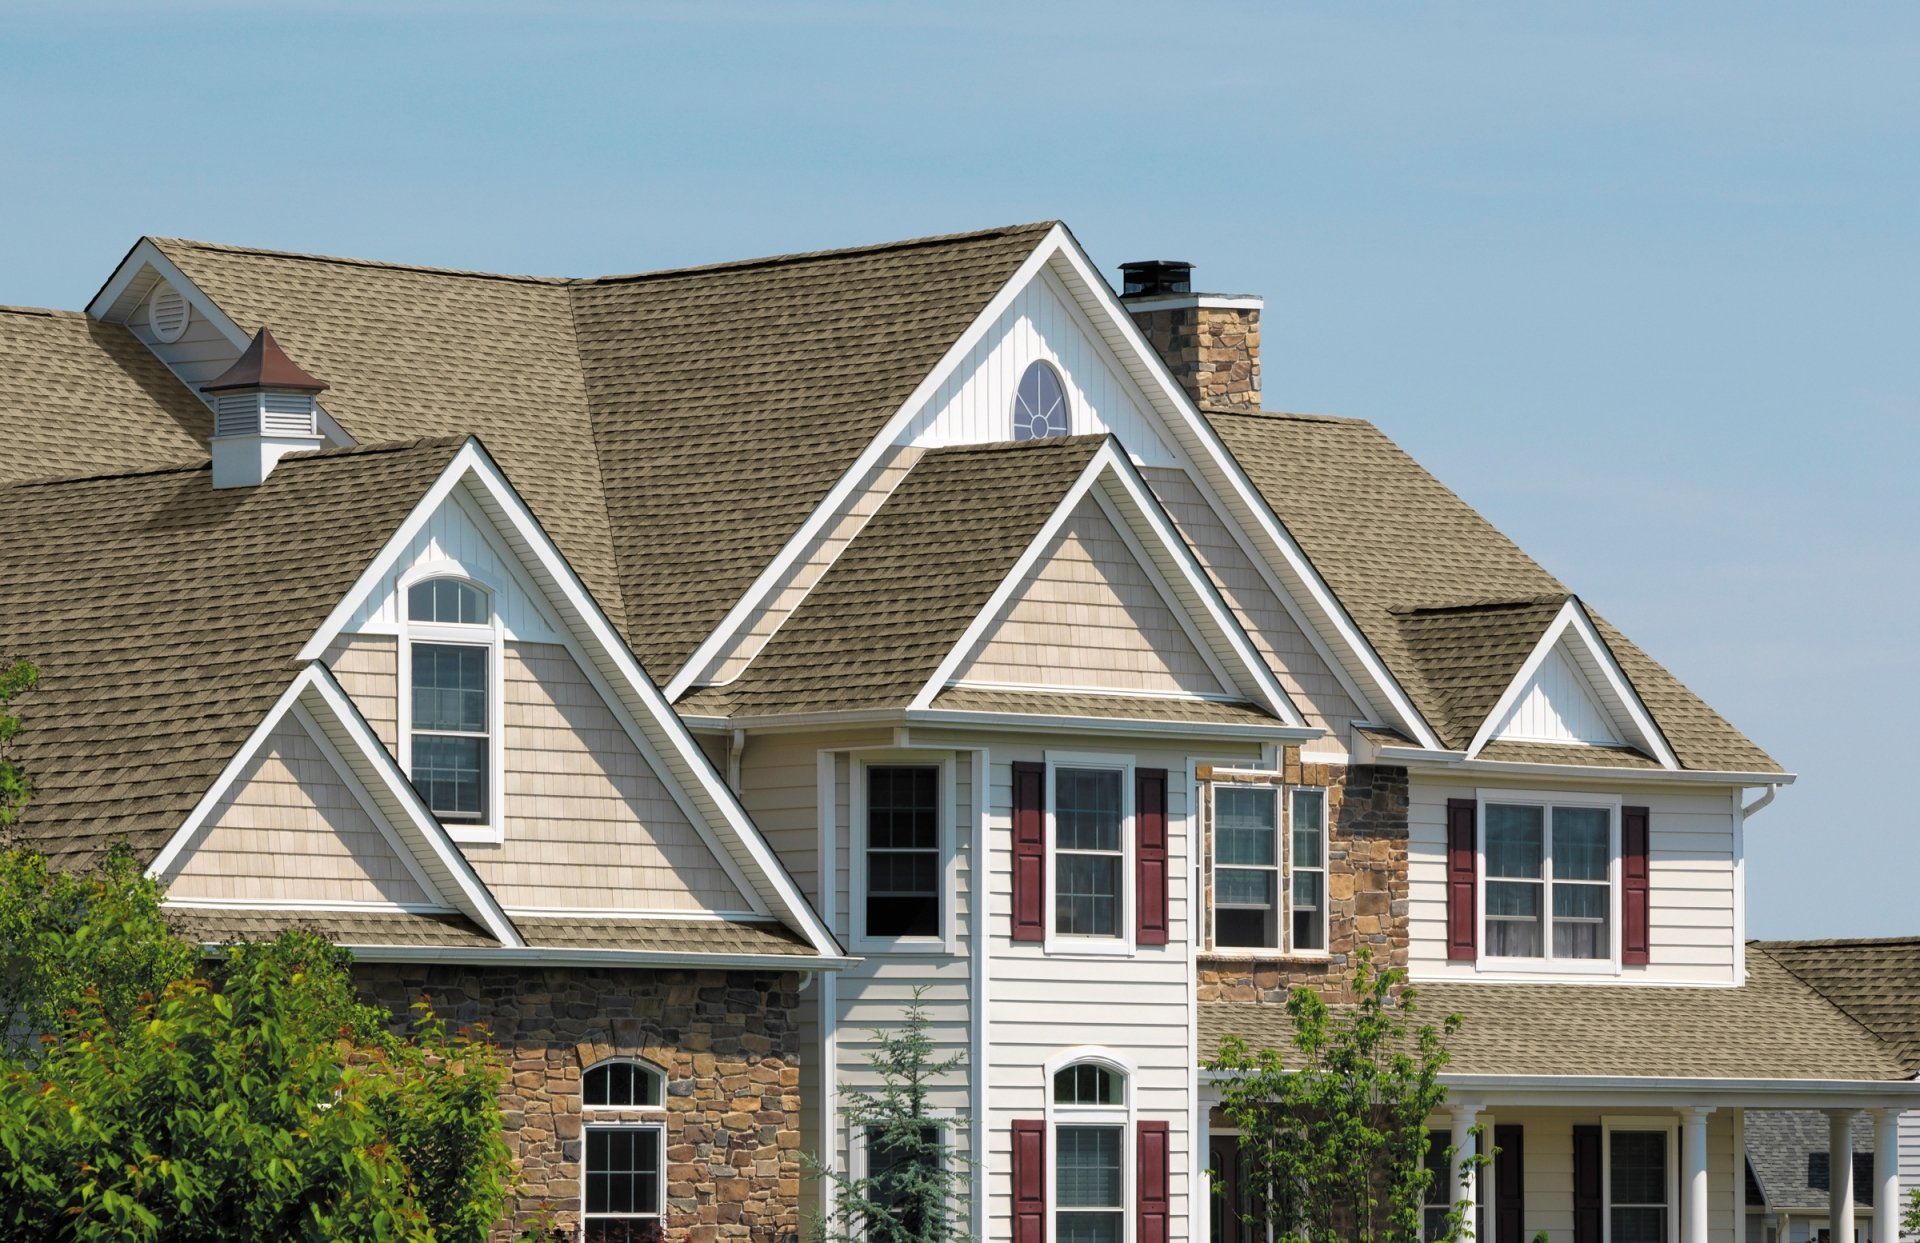 The Best Roofing Company in Belvidere Illinois!